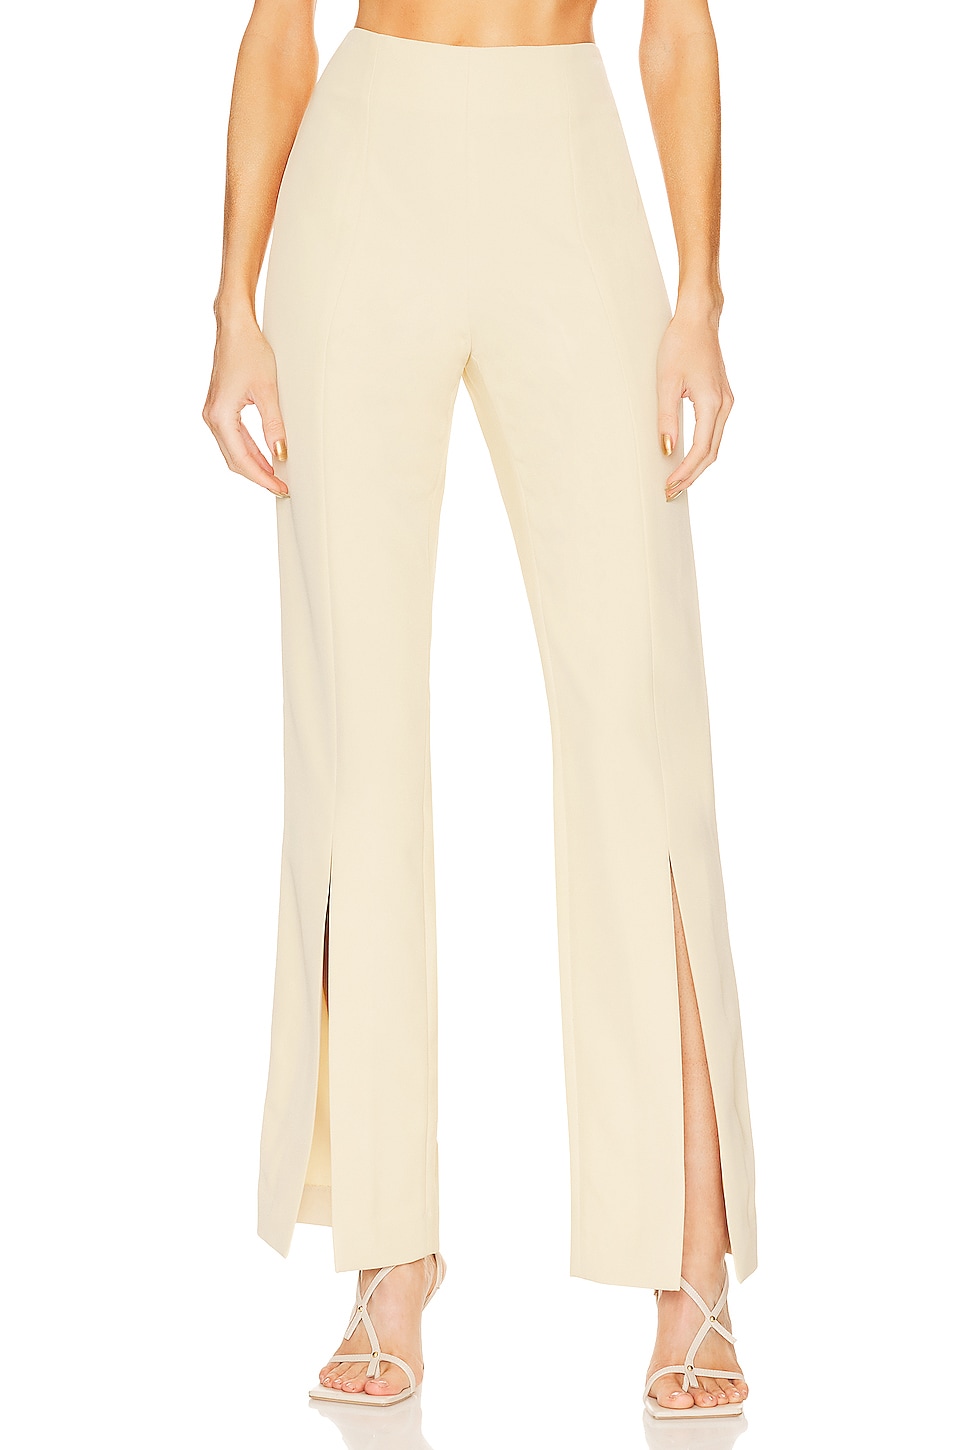 Tom Ford Wool and Silk 4 Pocket Cocktail Pants women - Glamood Outlet